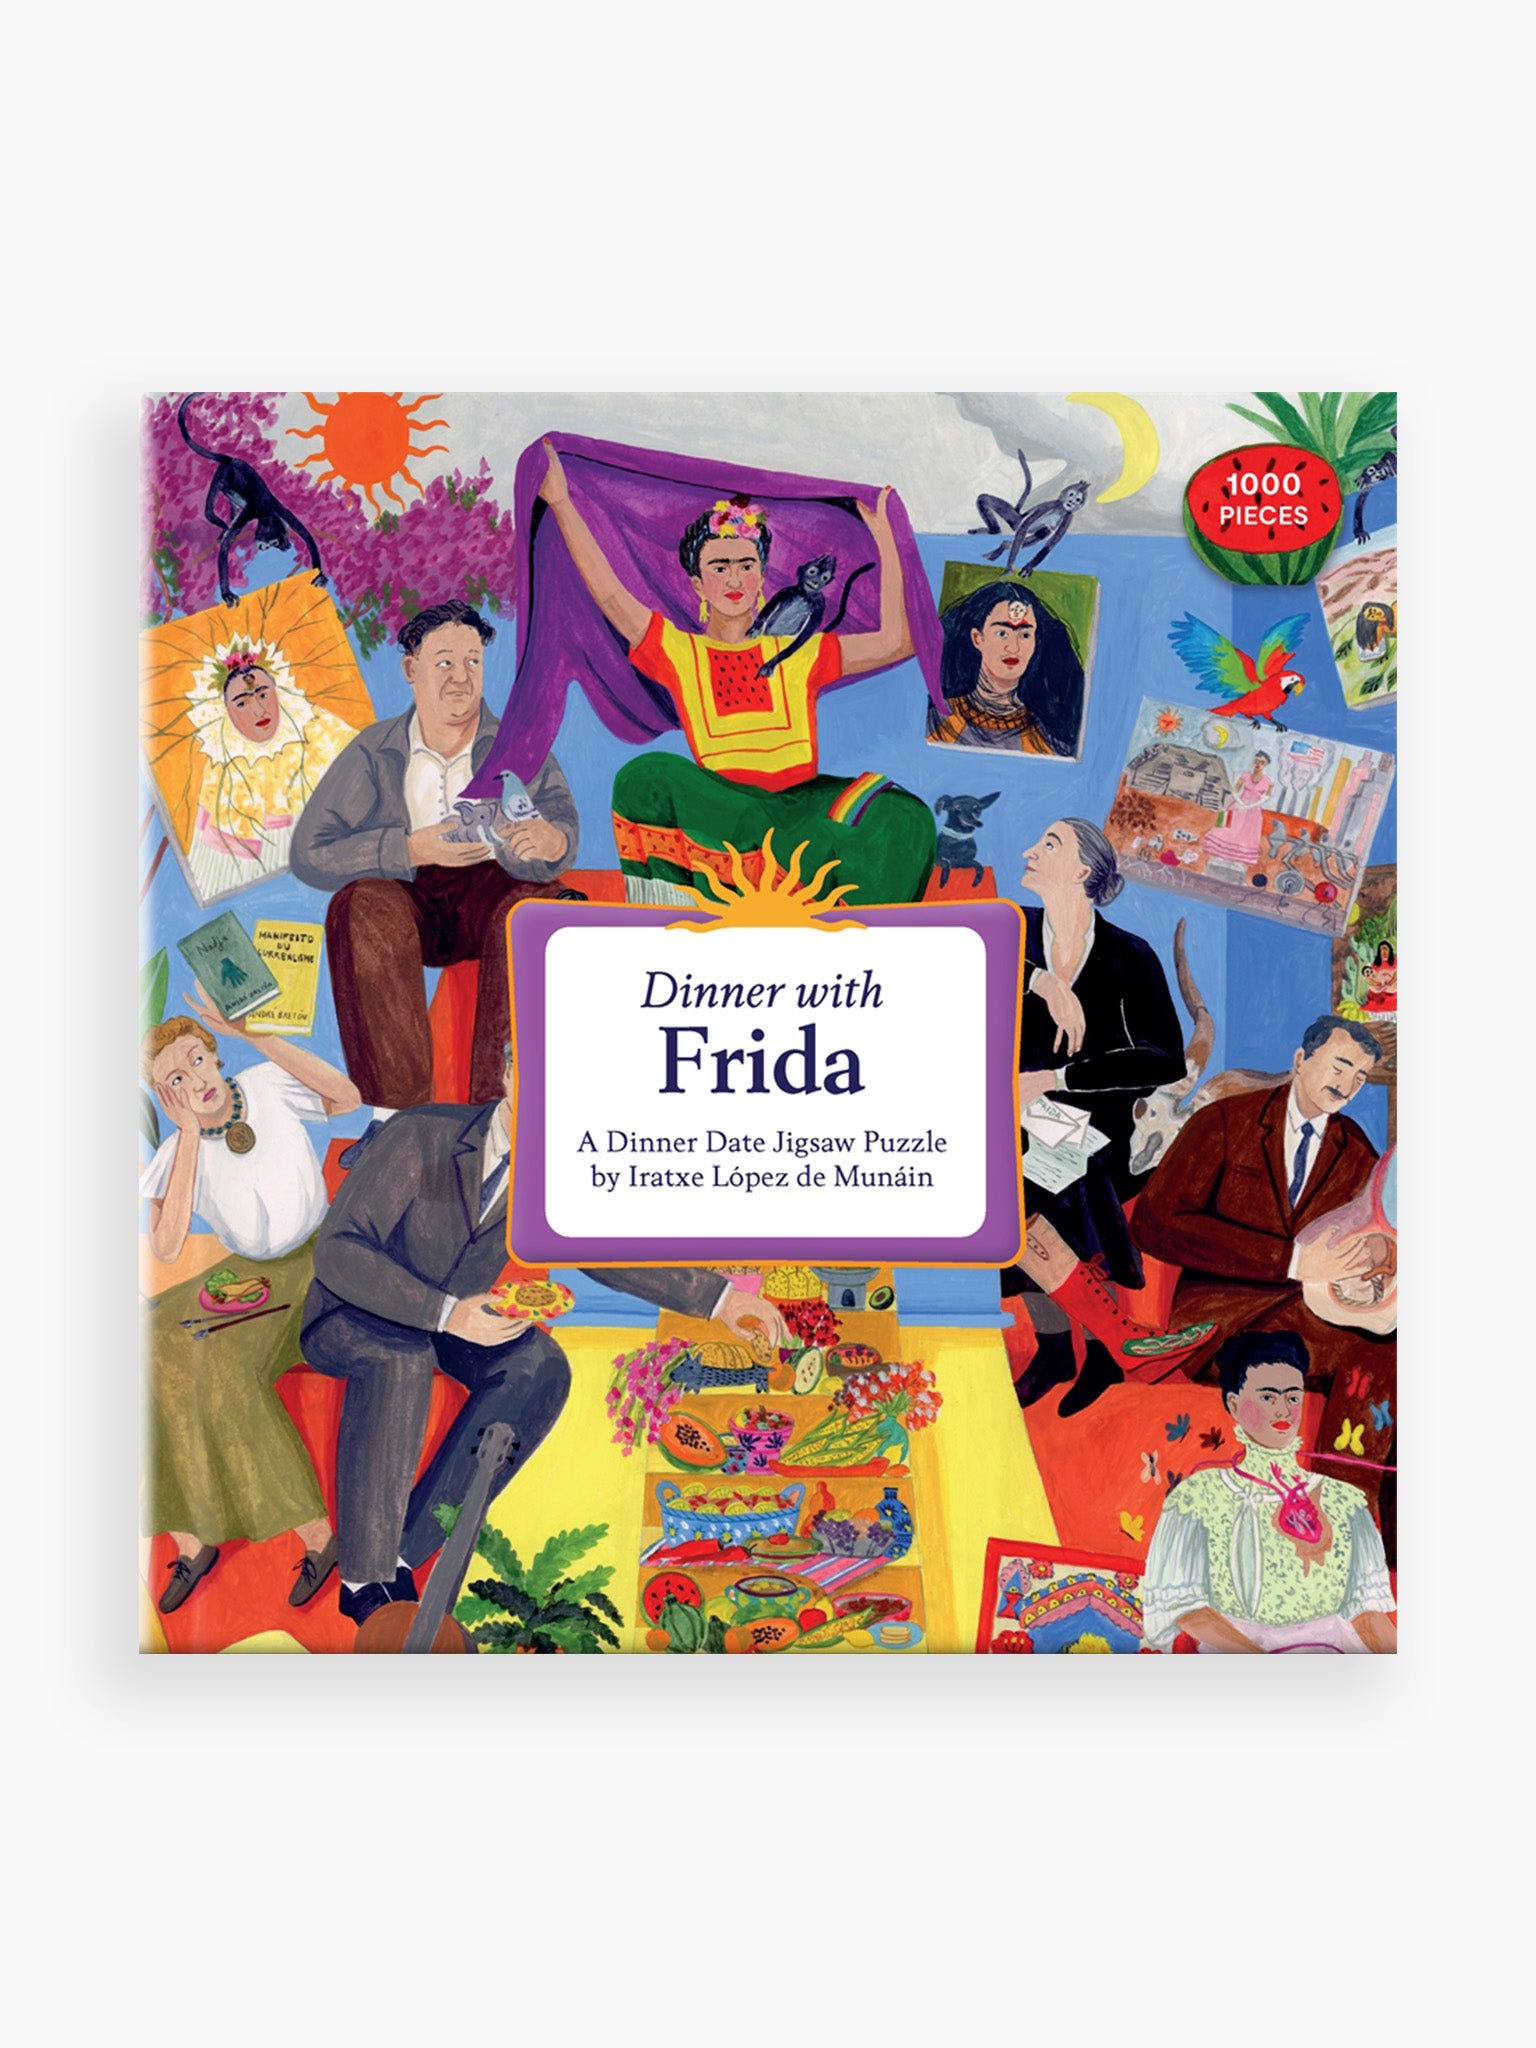 Dinner with Frida Puzzle - 1000 pcs (Pick-up Only)